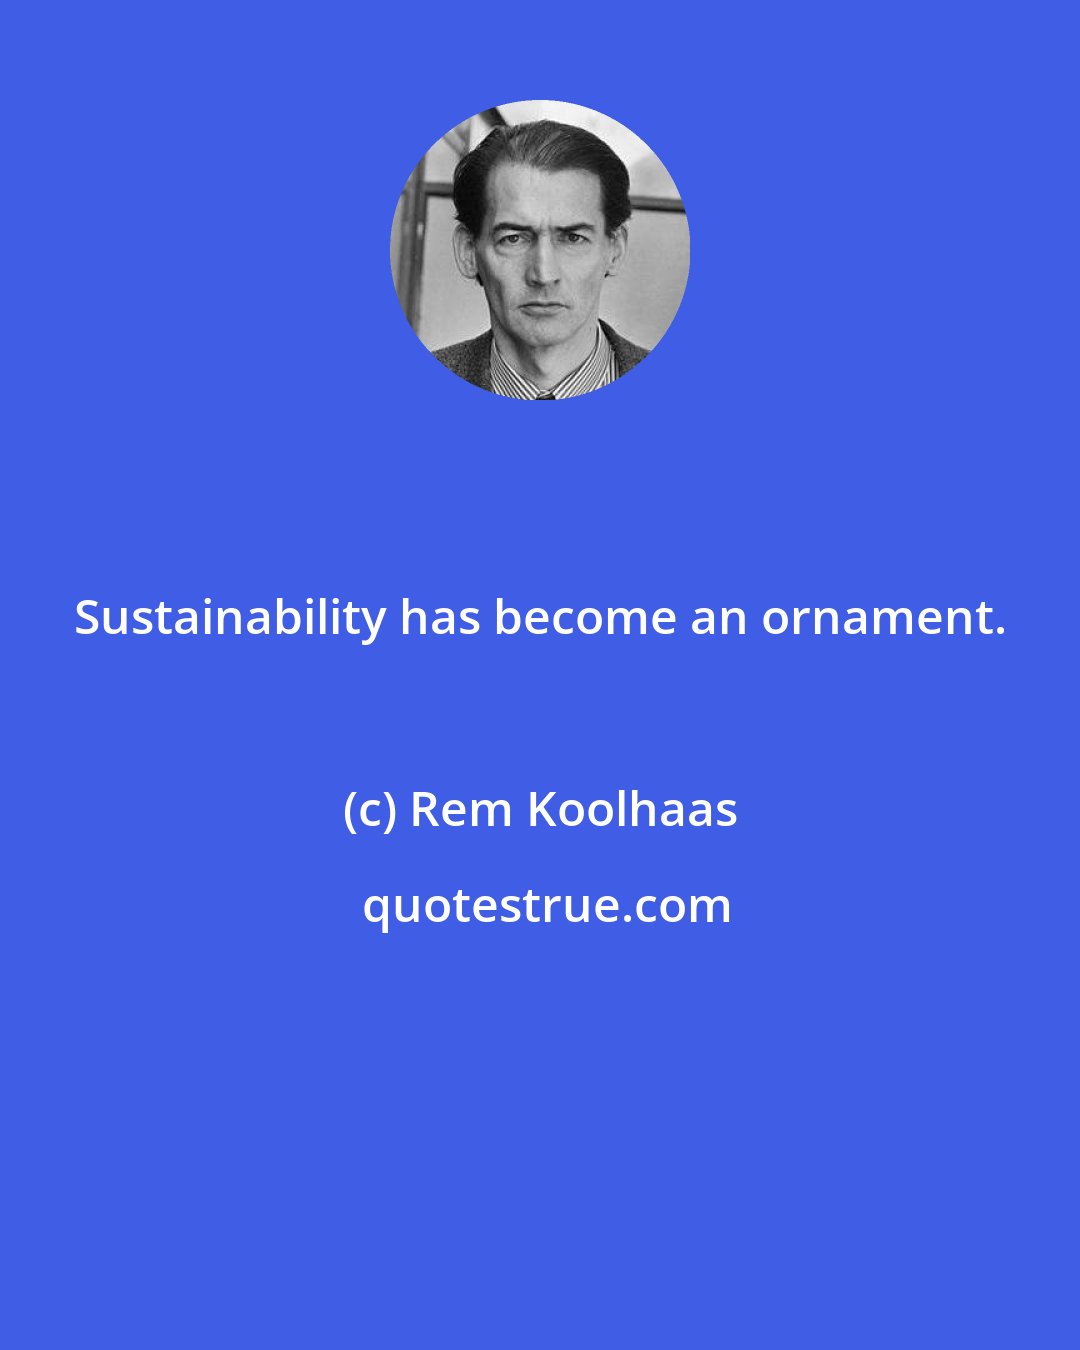 Rem Koolhaas: Sustainability has become an ornament.